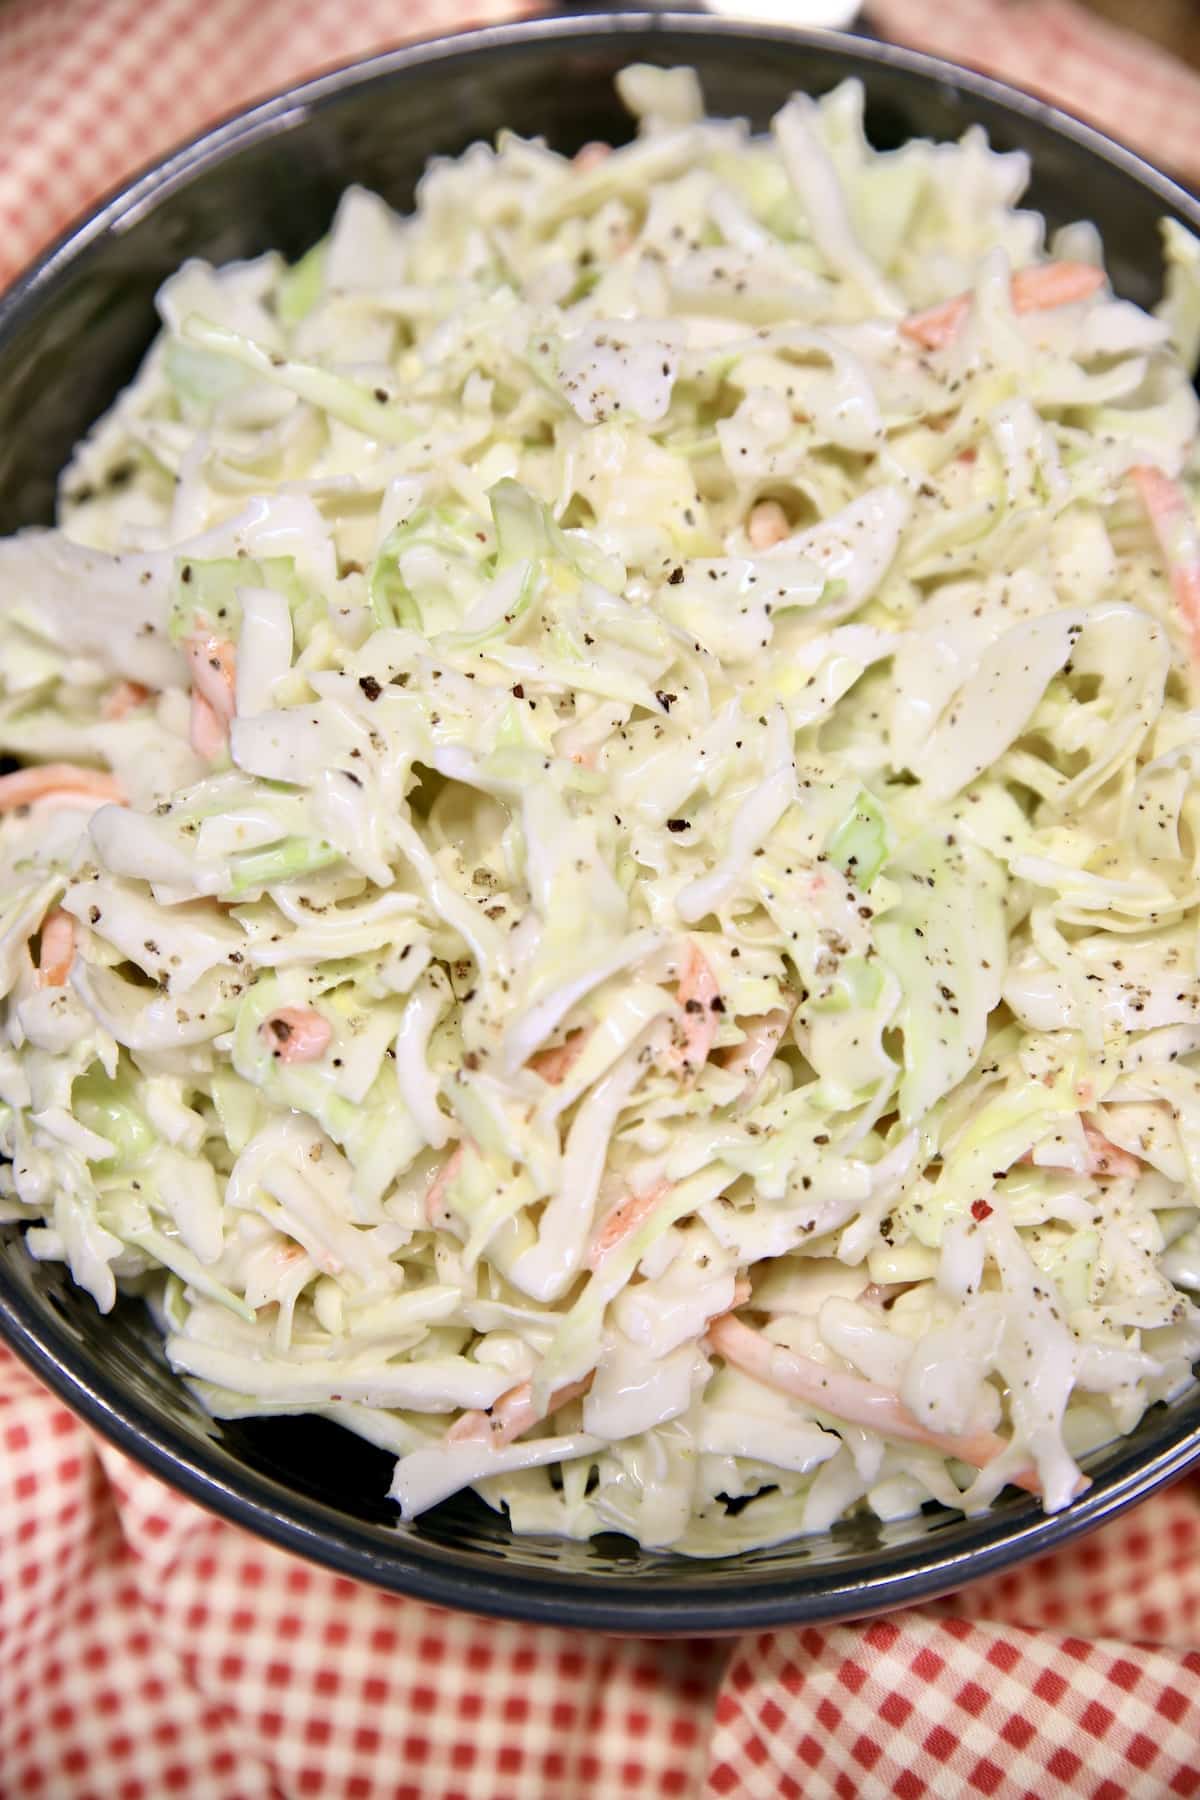 Coleslaw in a black bowl on red check napkin.